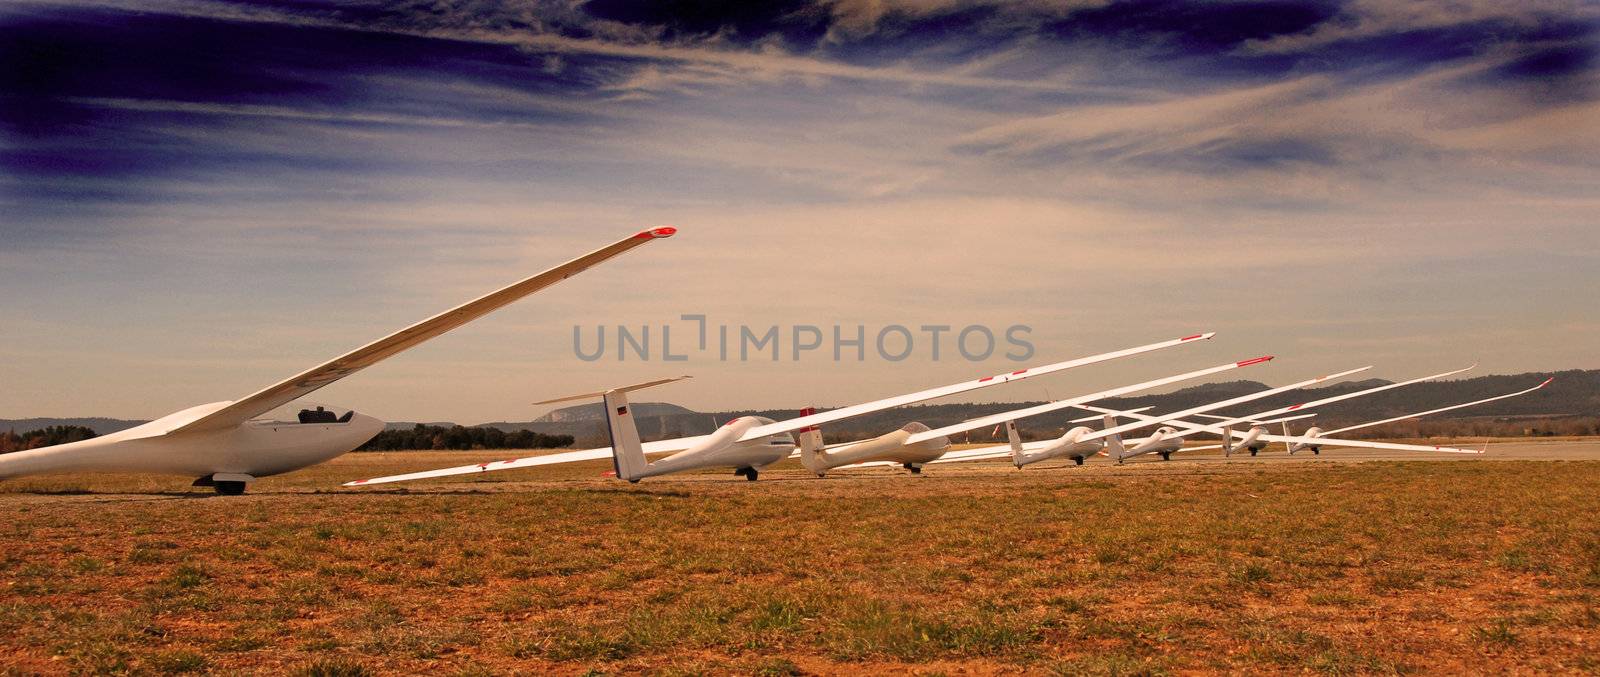 seven white gliders in an aerodrome in south of France